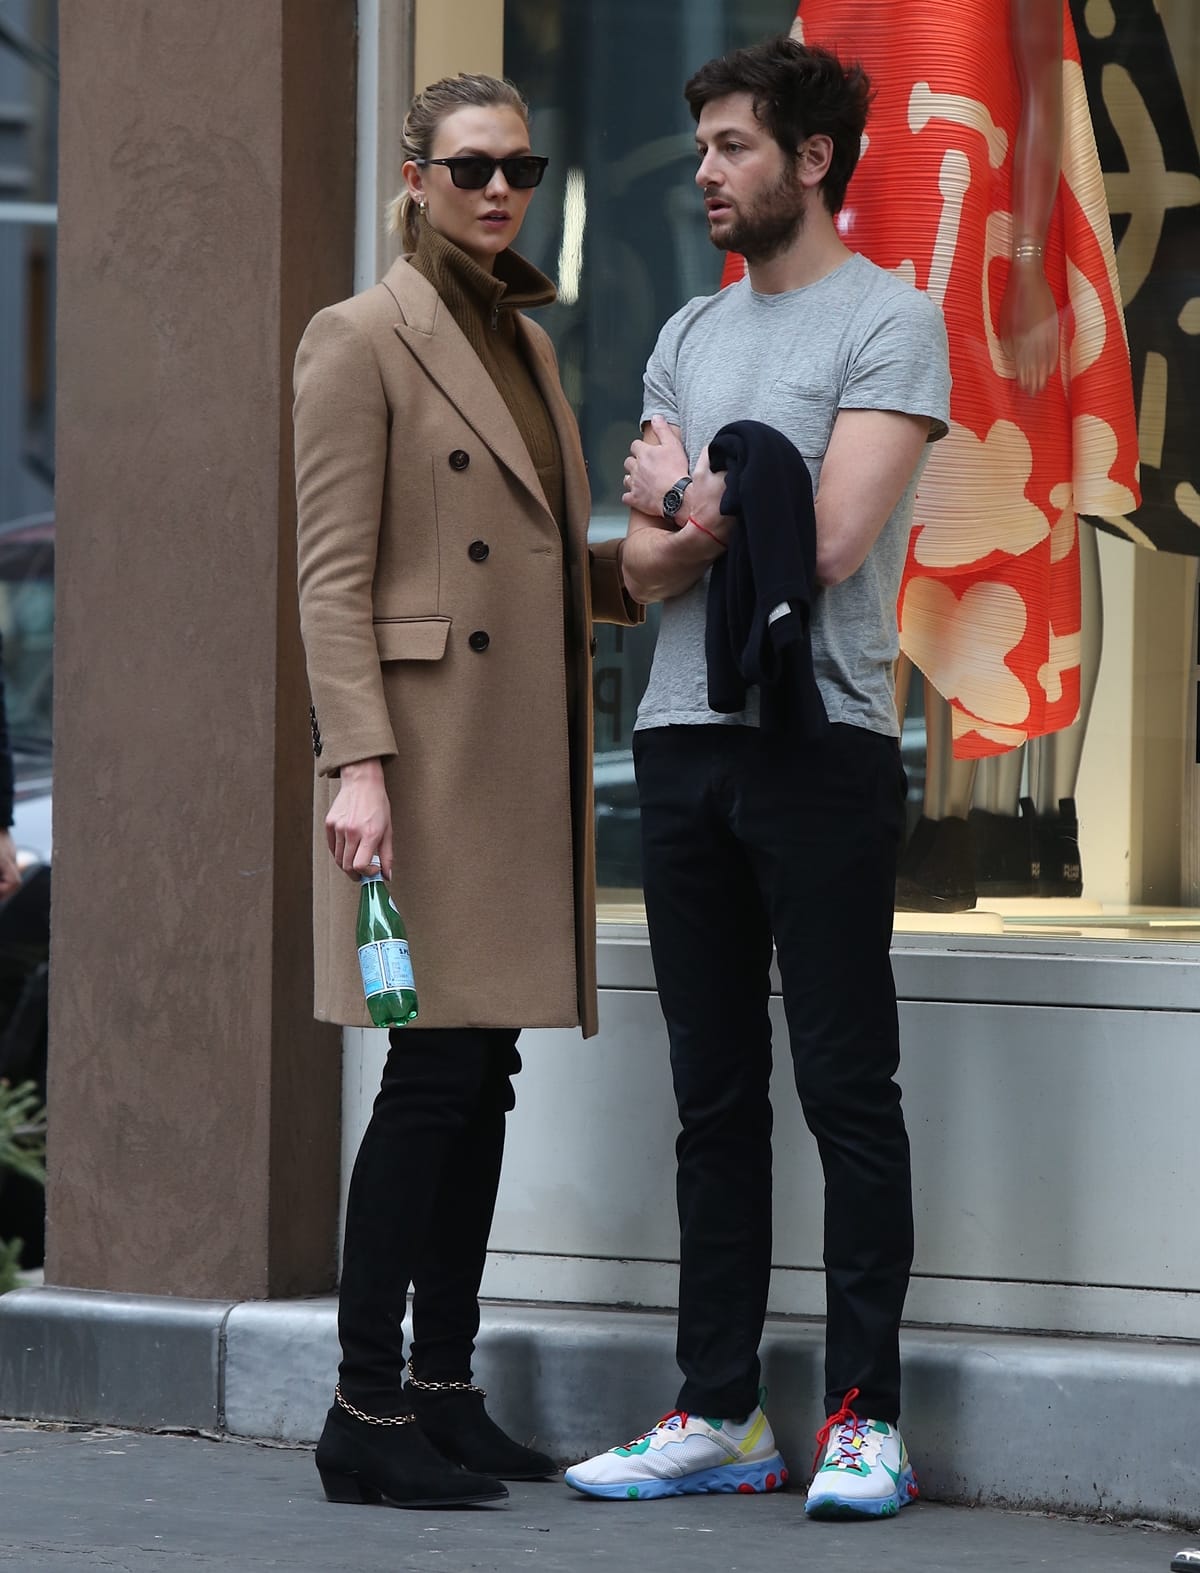 Wearing a Burberry double-breasted extra-long wool cashmere coat and Stella Luna over-the-knee boots, Karlie Kloss looks shorter than her husband Joshua Kushner